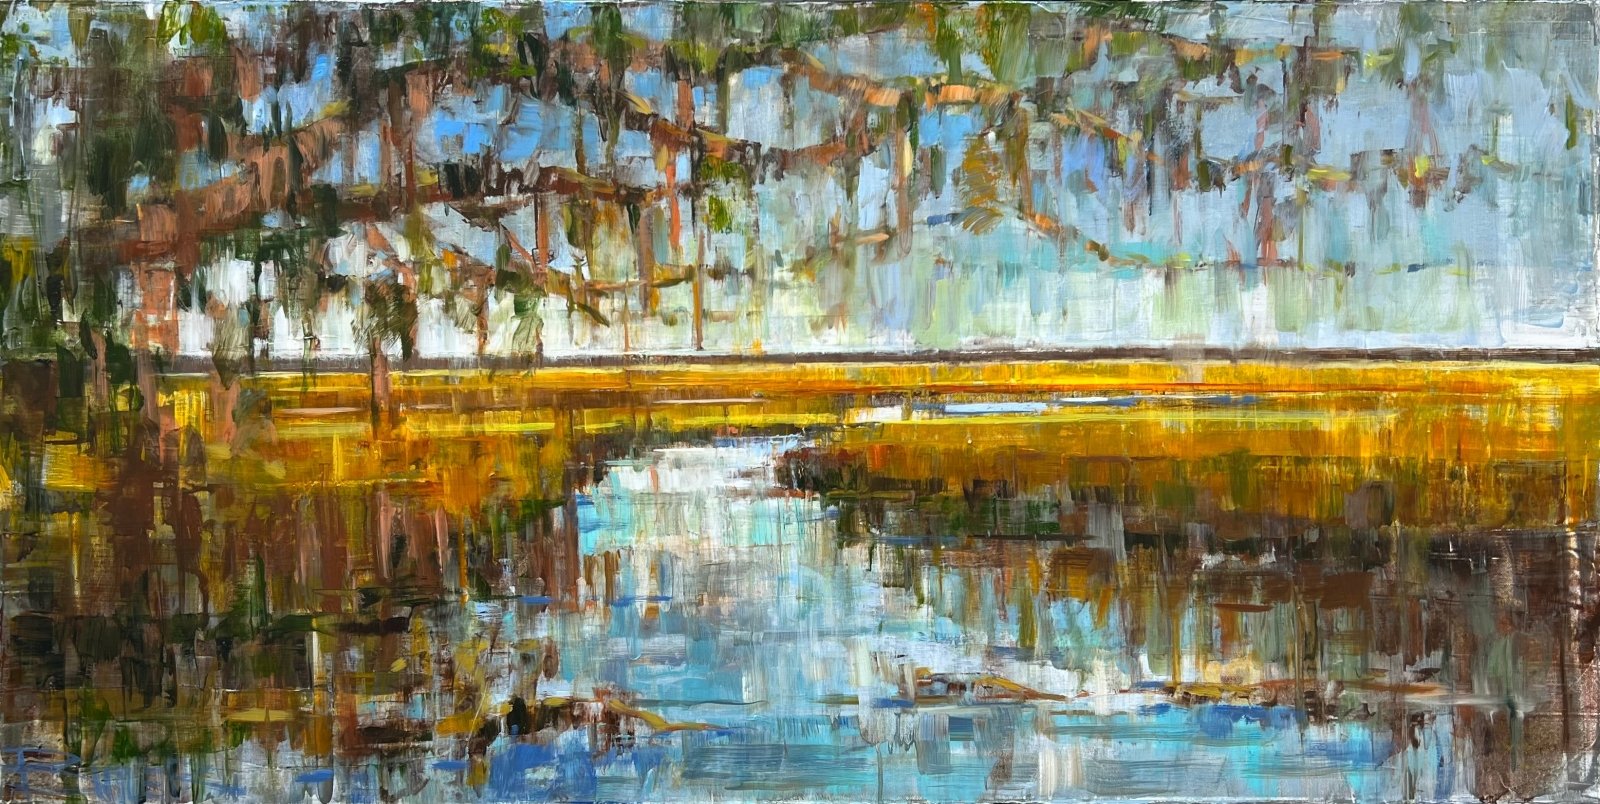 Woven Waterway by Curt Butler at LePrince Galleries